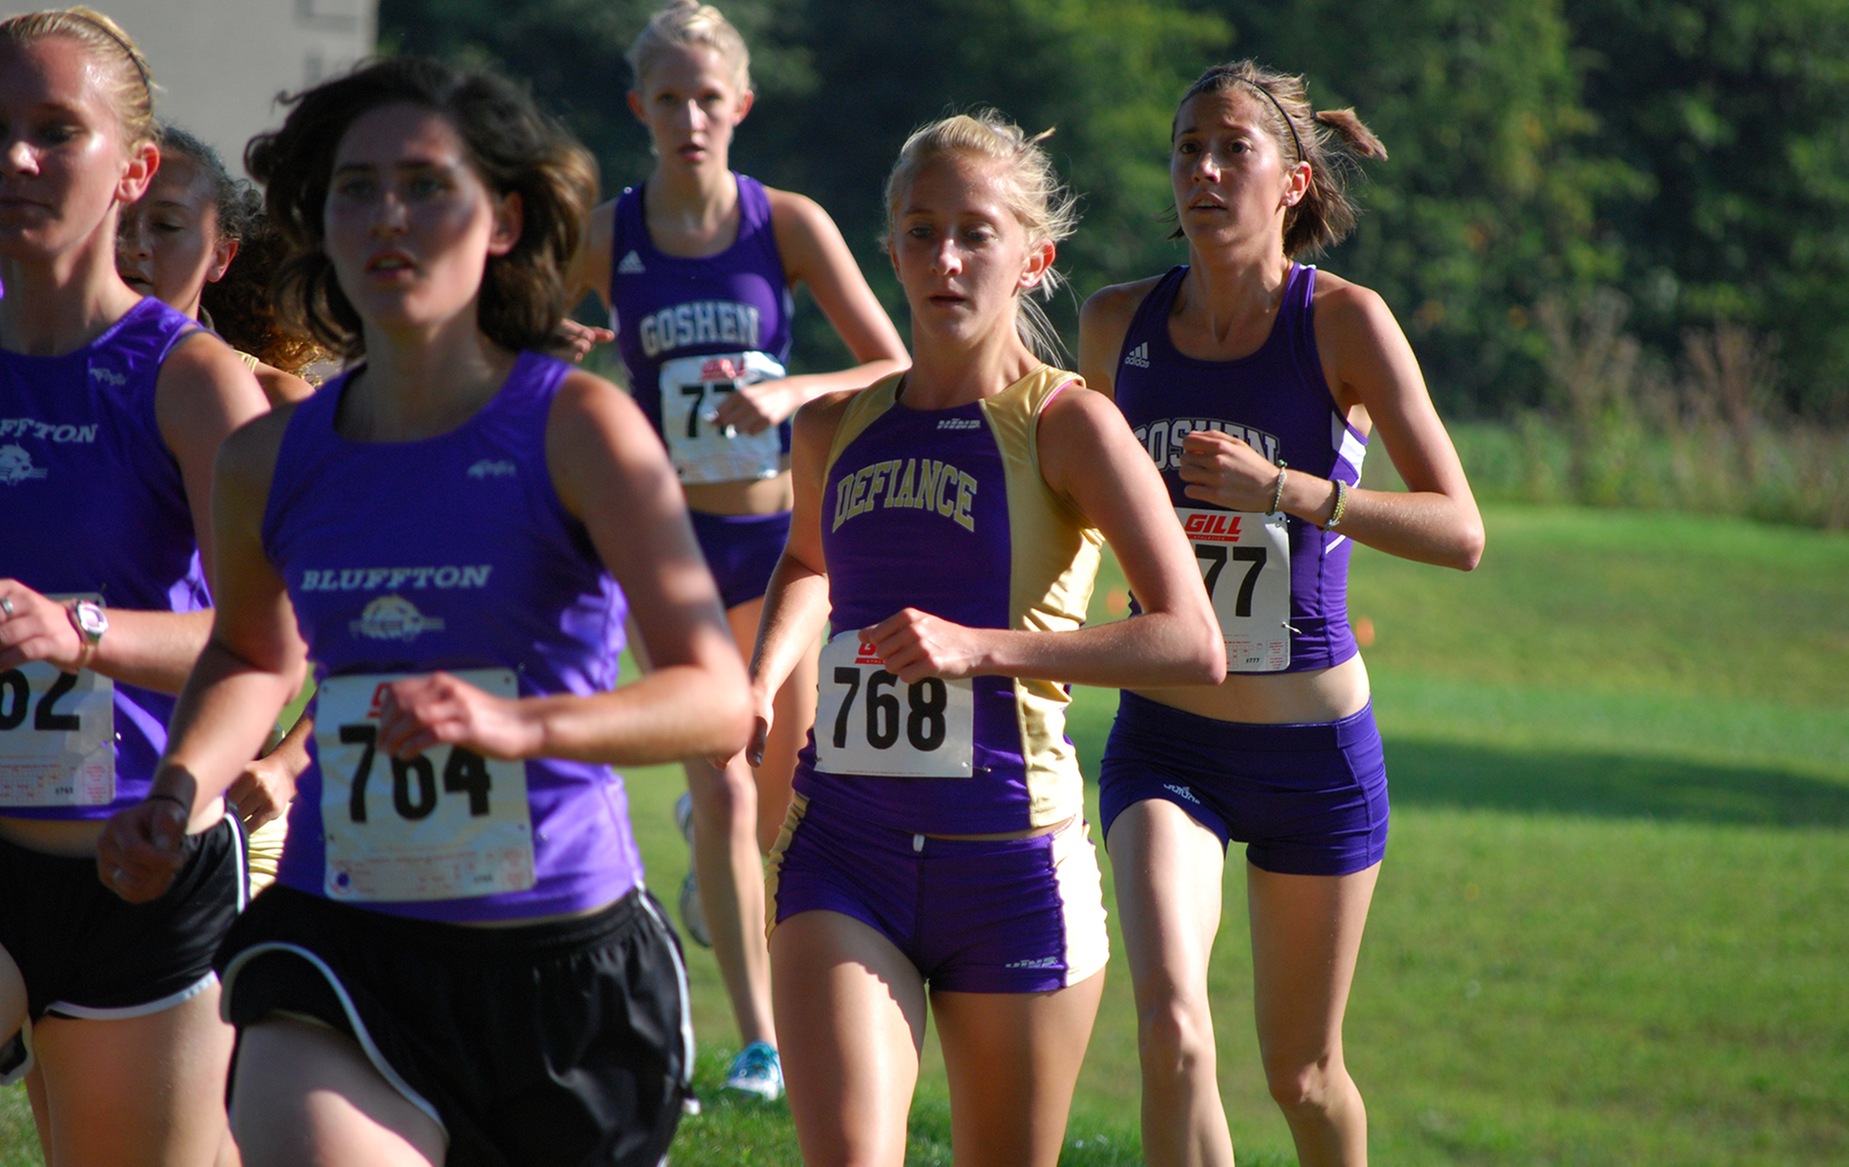 DC Women Take First Place at Bluffton Invitational